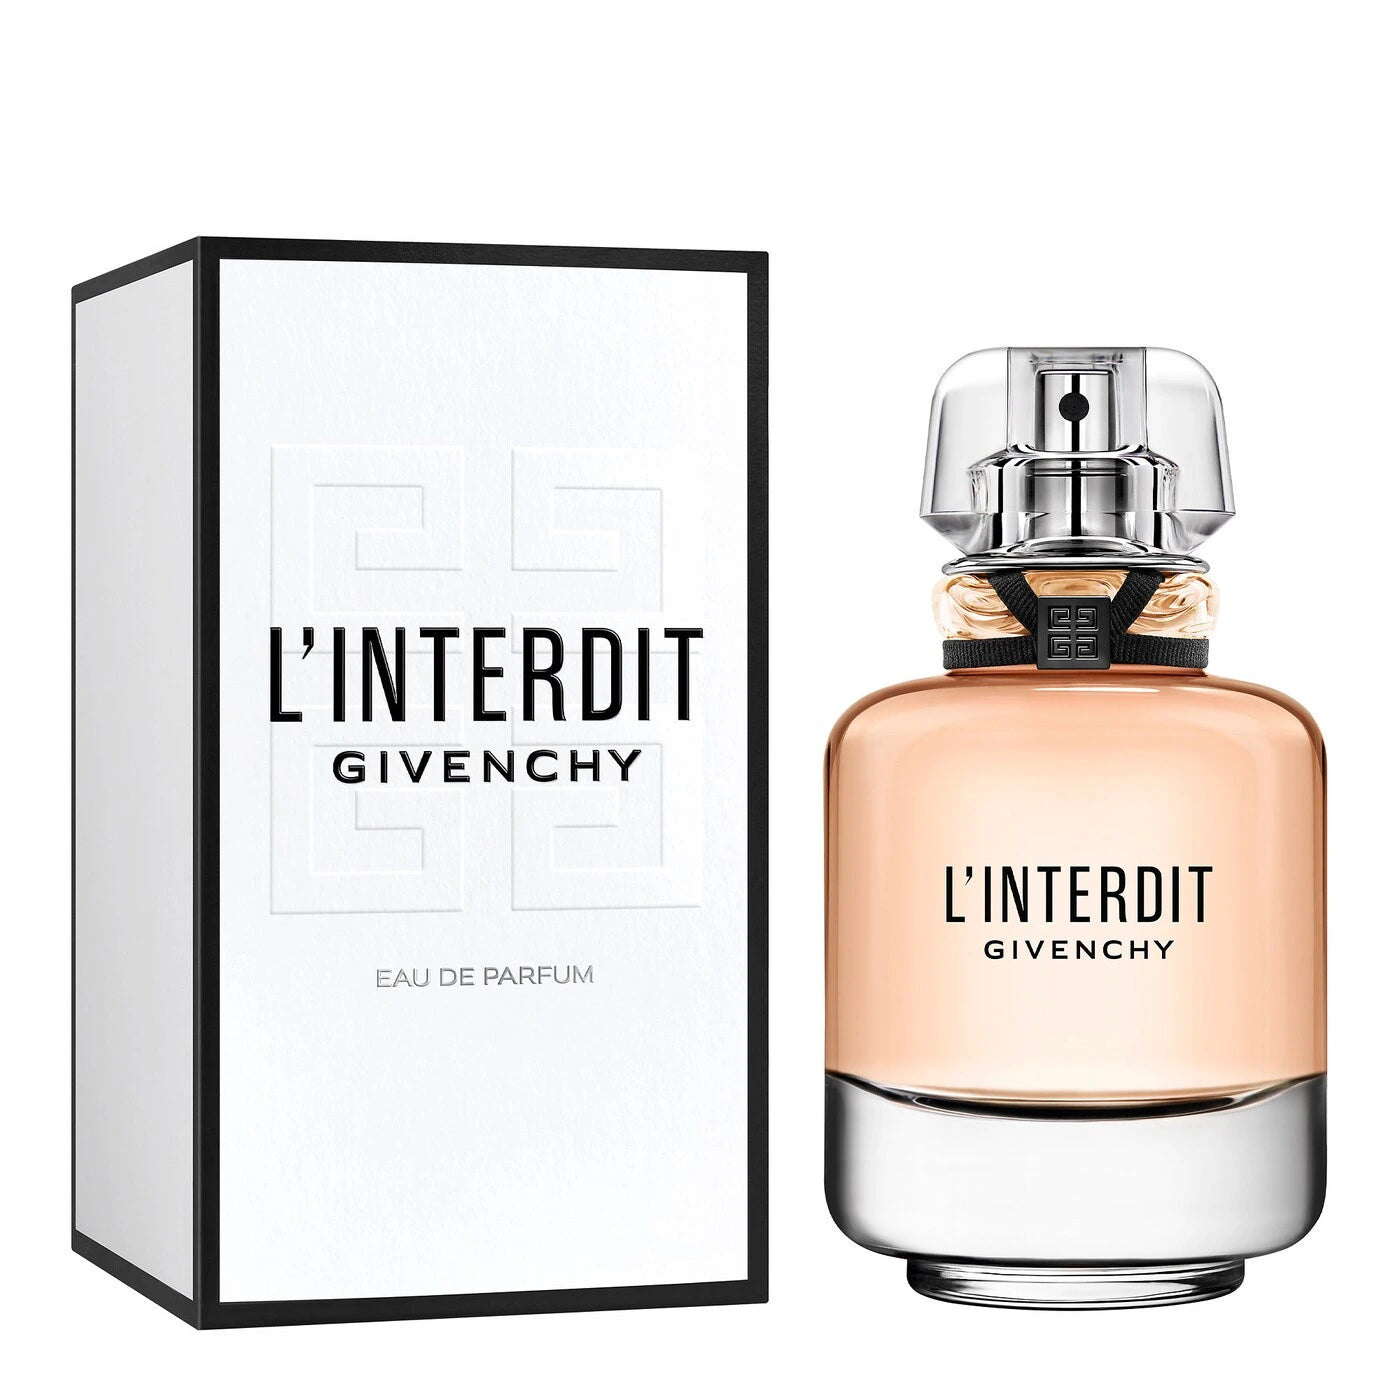 <p><meta charset="utf-8"><span data-mce-fragment="1">L’Interdit Eau de Parfum is an invitation to defy convention and embrace individuality. The perfume’s white floral bouquet is filled with top notes of orange blossom combined with jasmine and tuberose. Contrasting base notes of wood unleashes a bold and long lasting luminous trail.<br><meta charset="utf-8">
<b data-mce-fragment="1"><br>Fragrance Family:</b> Florals<br data-mce-fragment="1"></span><span data-mce-fragment="1"><b data-mce-fragment="1">Scent Type:</b> Warm Florals<br data-mce-fragment="1"><b data-mce-fragment="1">Key Notes:</b> Orange Blossom, Jasmine, Patchouli<br data-mce-fragment="1"><br data-mce-fragment="1"></span><b data-mce-fragment="1">About the Bottle:</b><span data-mce-fragment="1"> The bottle is an homage to Hubert de Givenchy's first perfume, L’Interdit, from 1957. The modern version dares you to forbid yourself of nothing and allow no rules.</span></p>